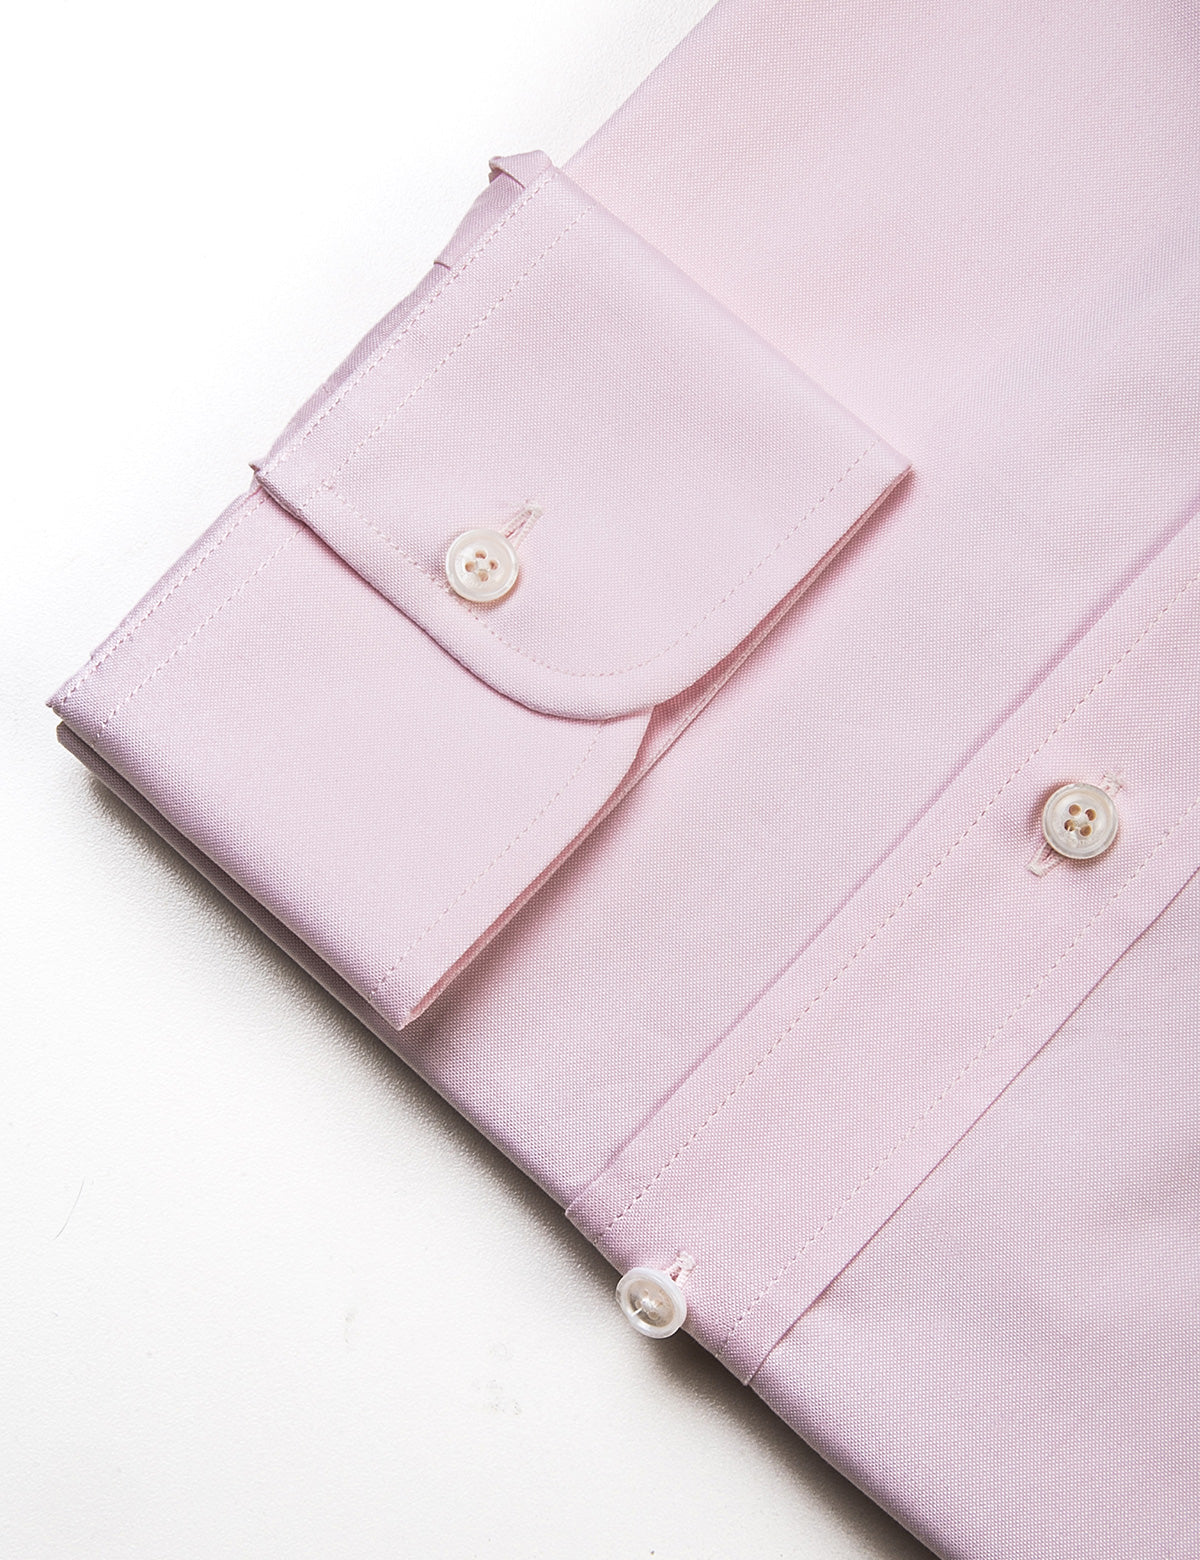 Detail of cuff, buttons, and fabric texture on Brooklyn Tailors BKT20 Slim Dress Shirt in Pinpoint Oxford - Pale Pink